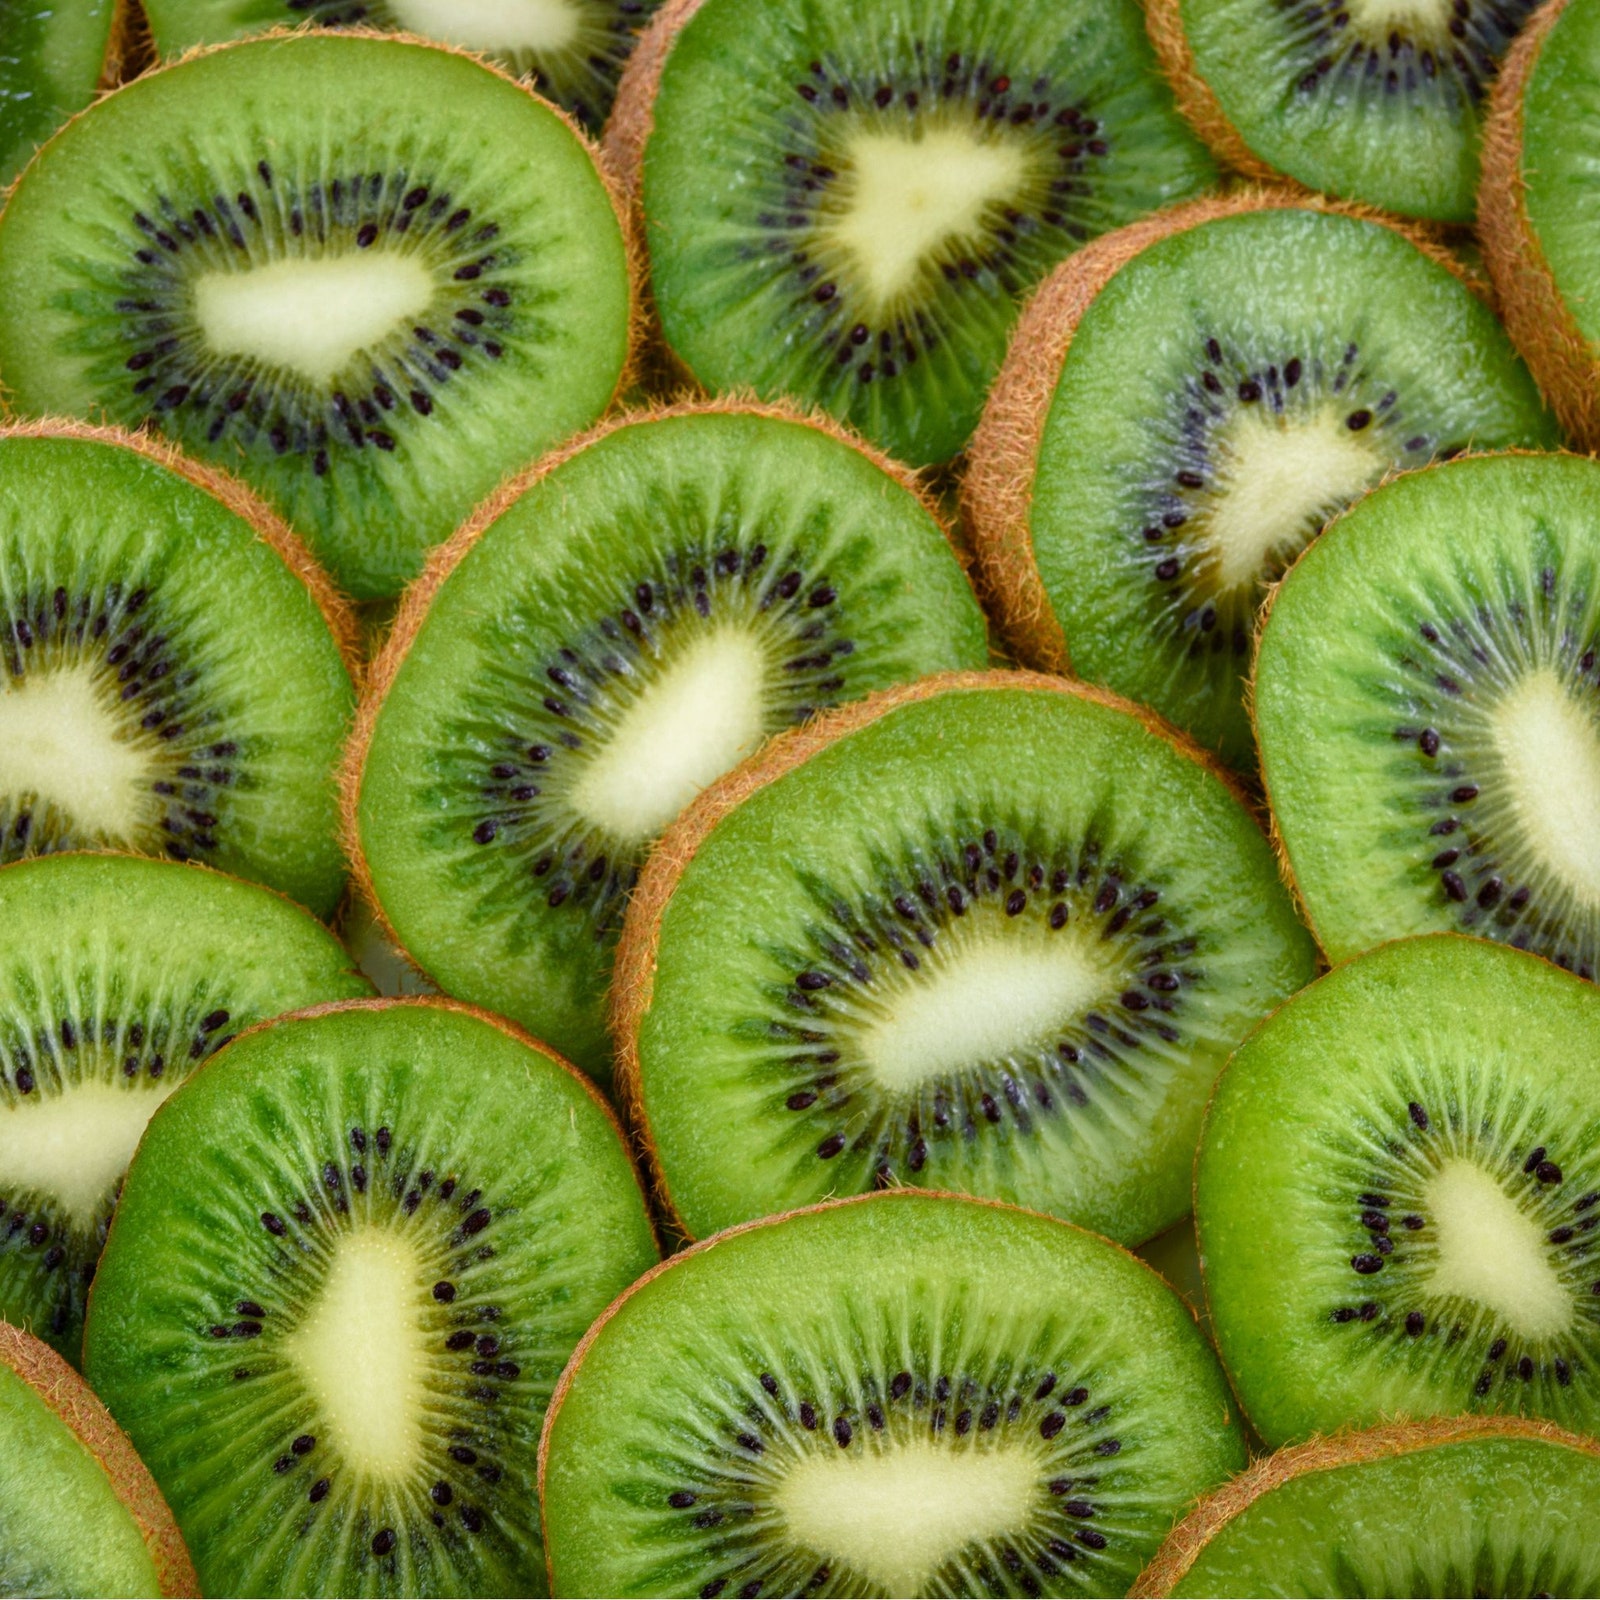 Kiwis Sold in 14 States Were Just Recalled Due to Potential Listeria Contamination